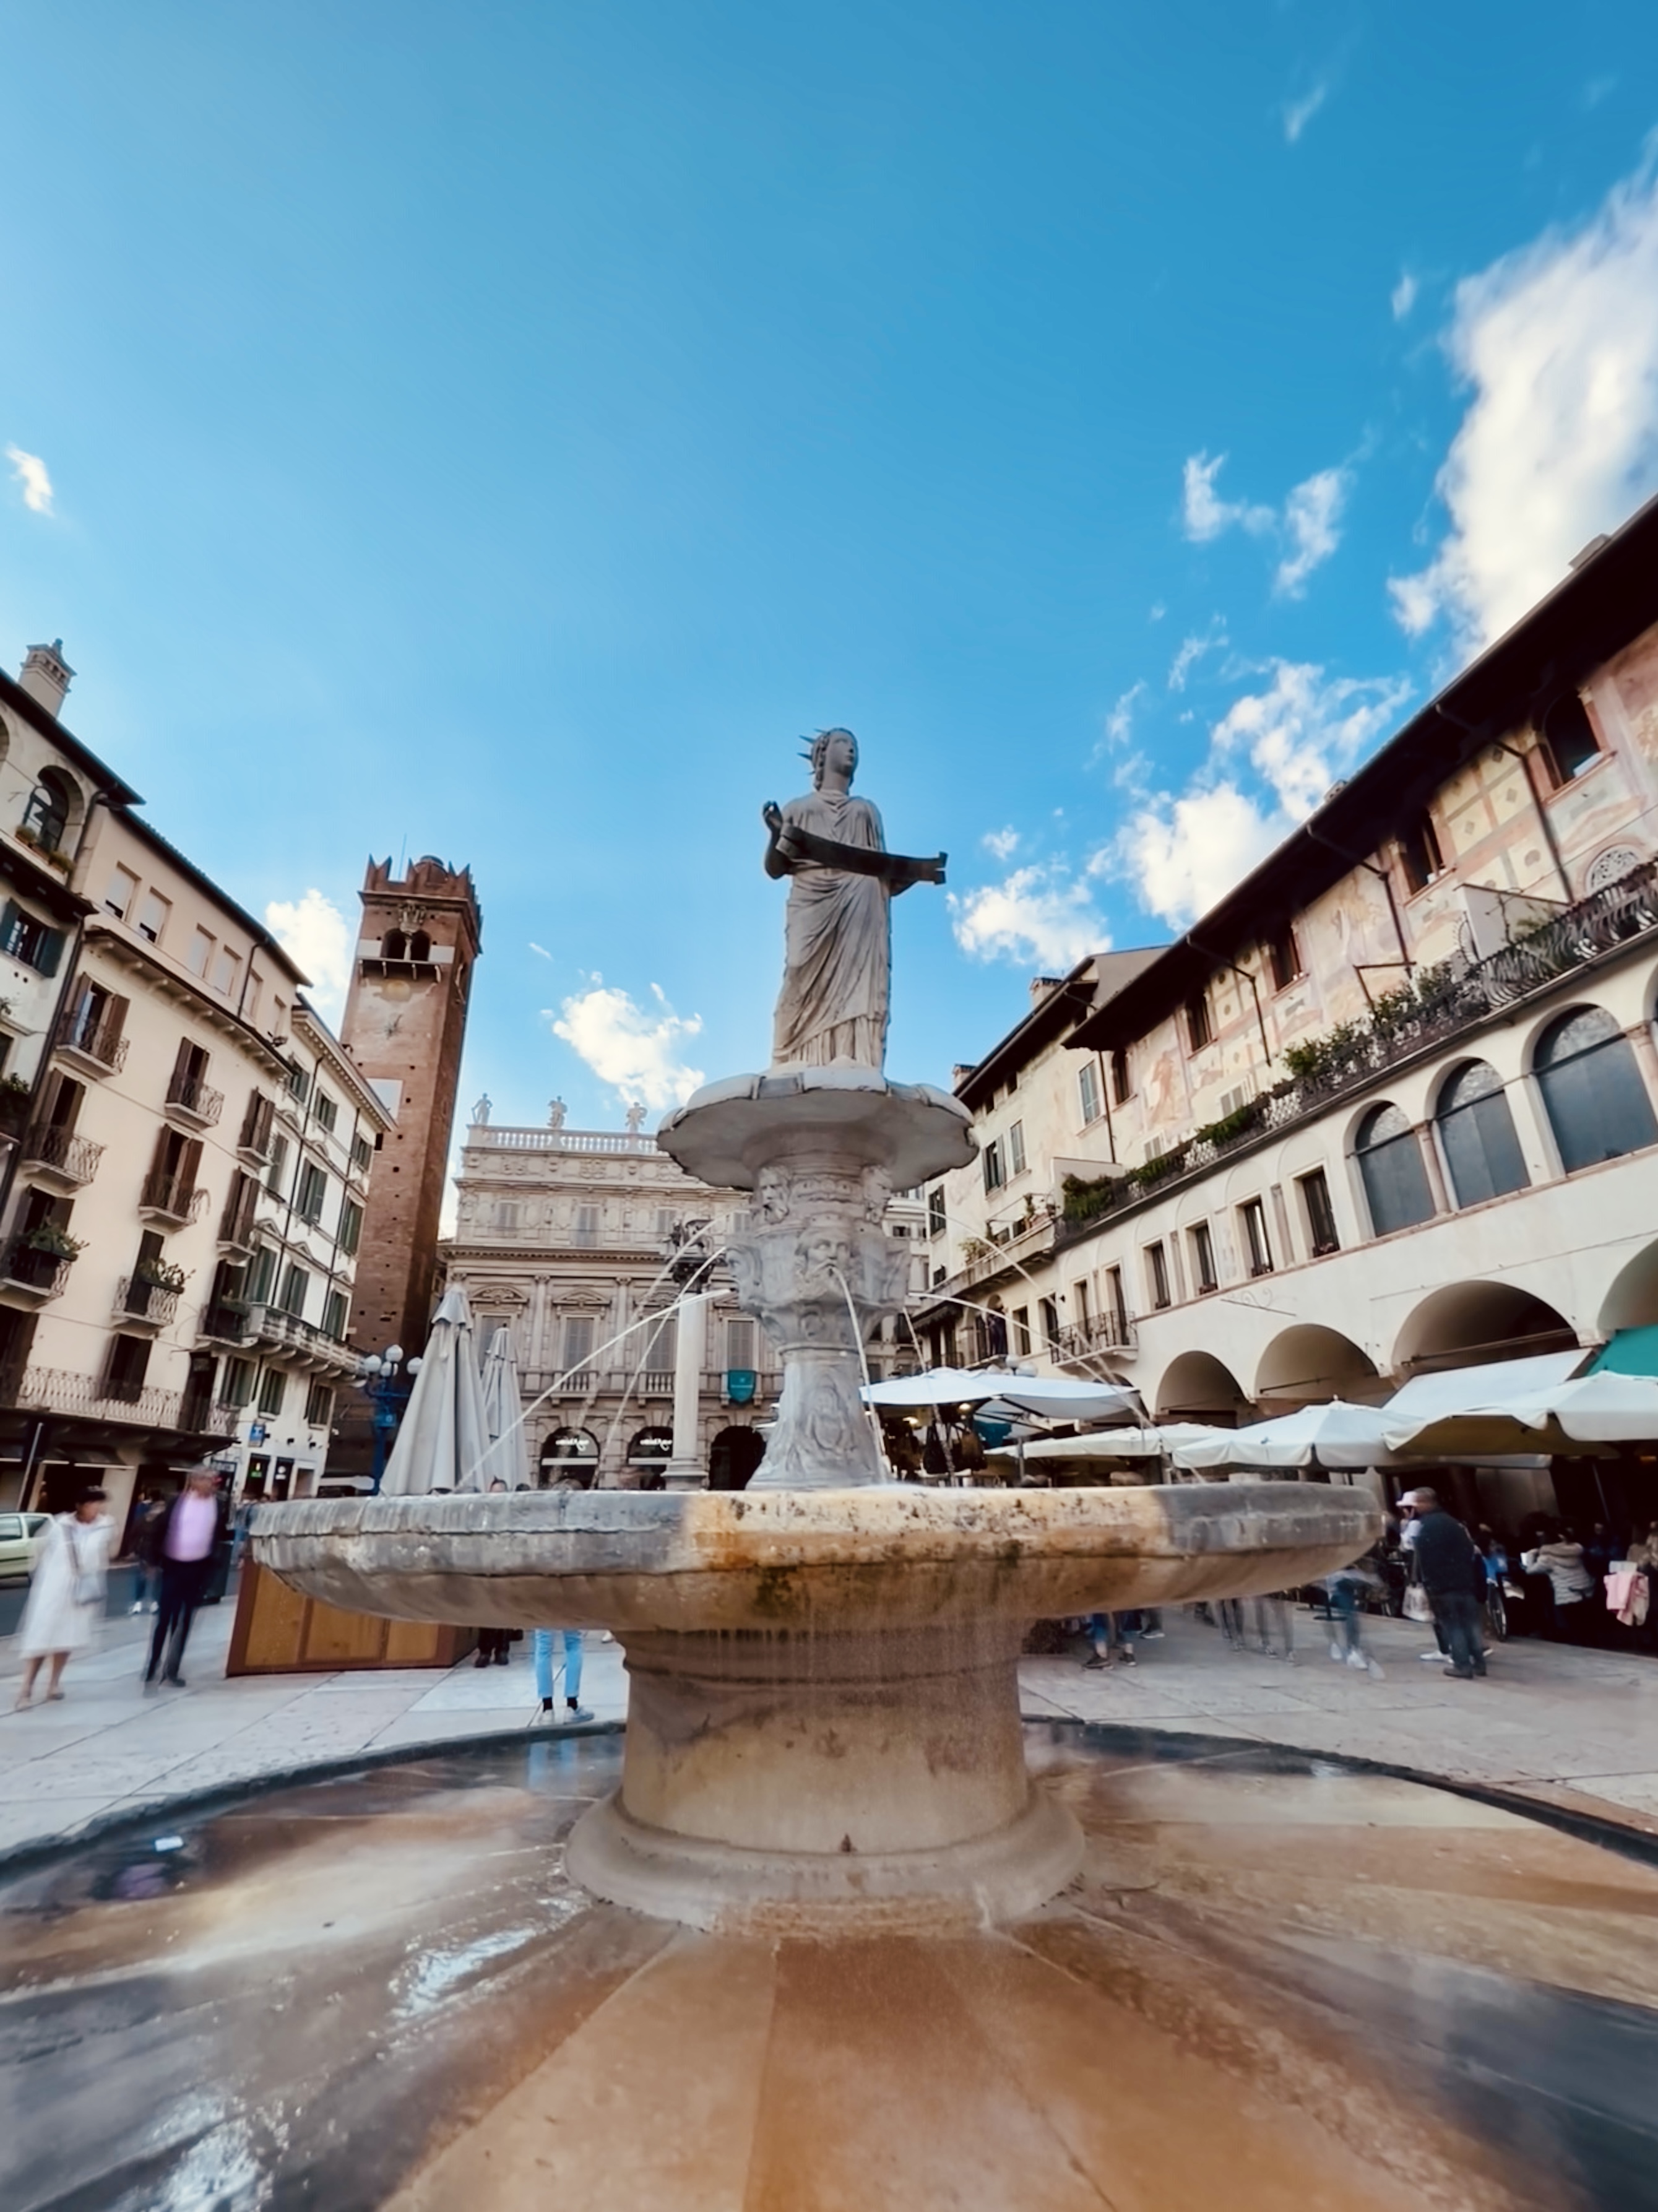 Ancient Roman fountain with a robed woman surrounded by buildings with frescoes and a brick tower in Verona, Northern Italy